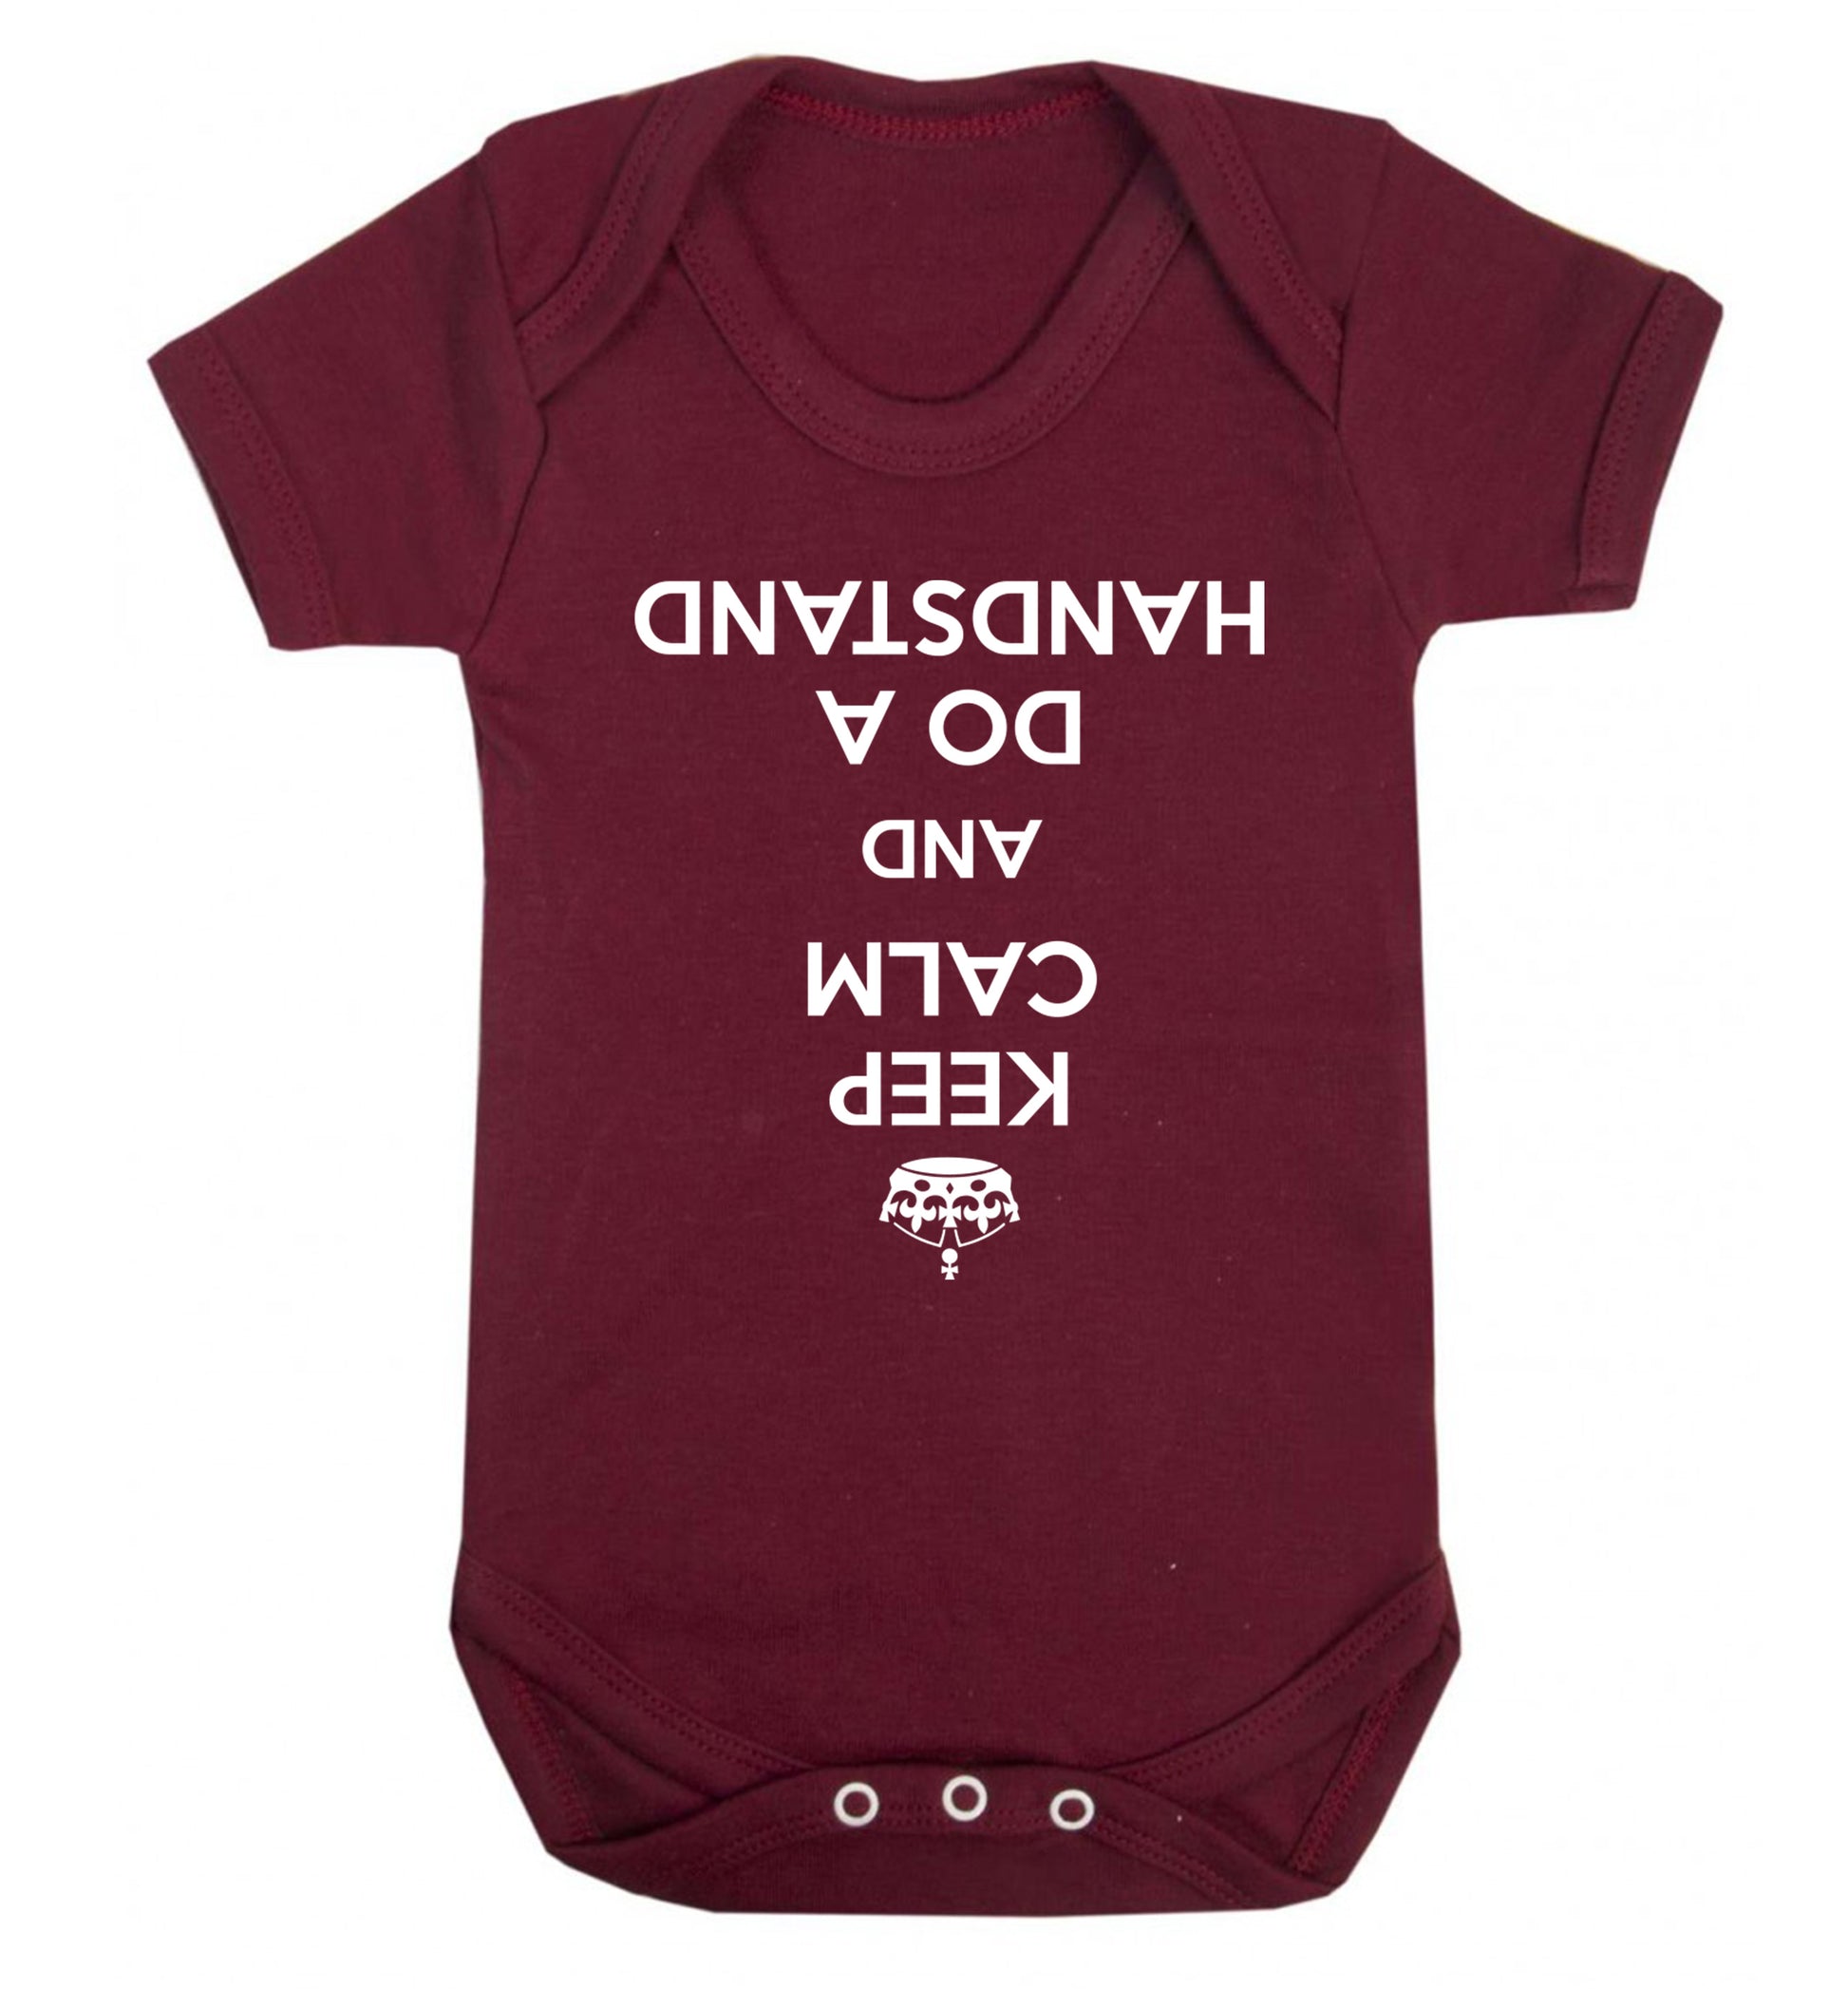 Keep calm and do a handstand Baby Vest maroon 18-24 months